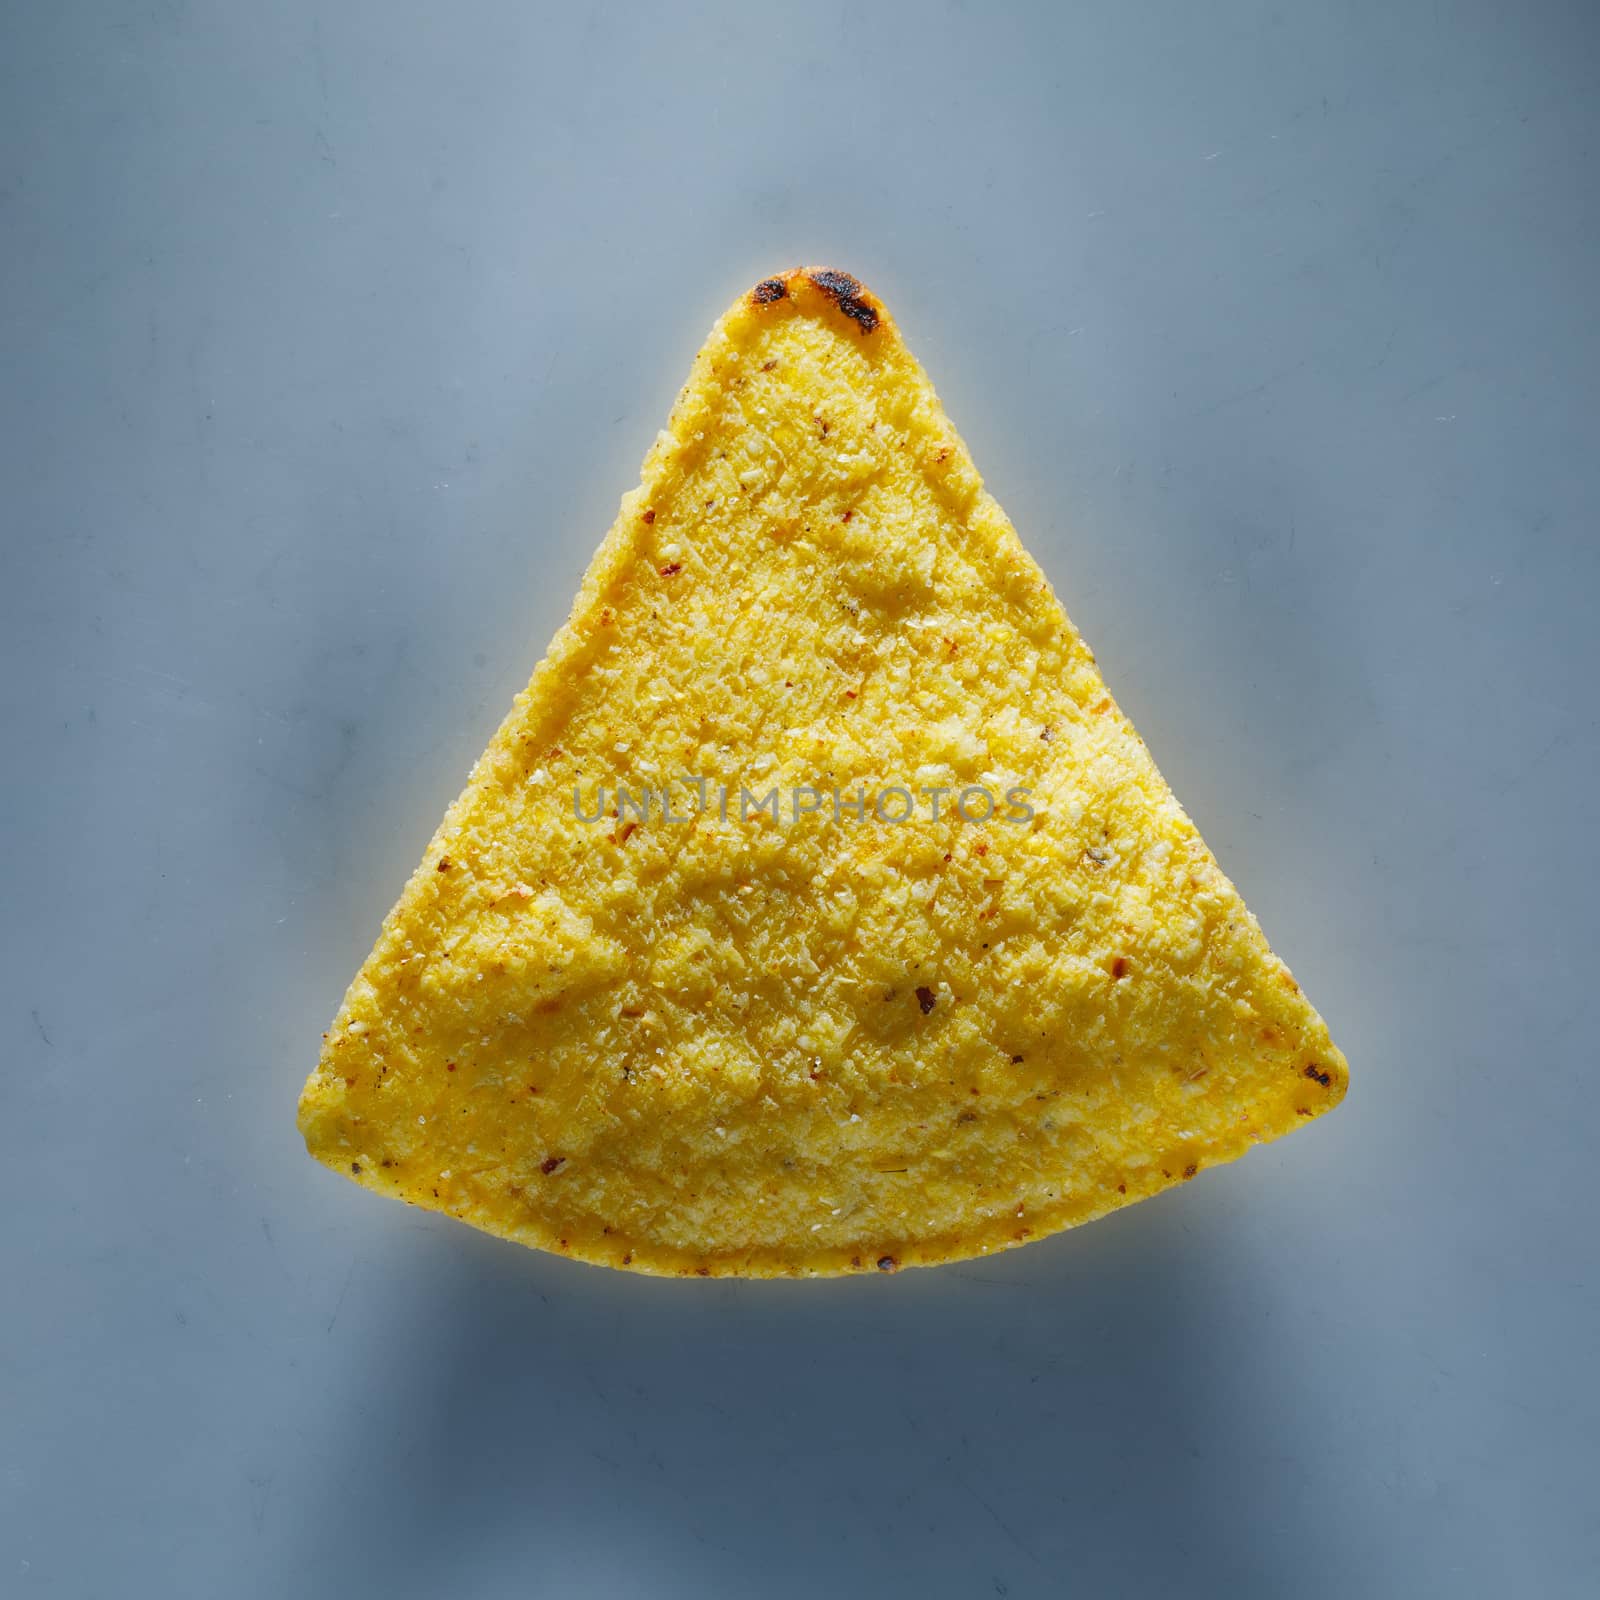 mexican nachos tortilla chips, close-up view by nikkytok